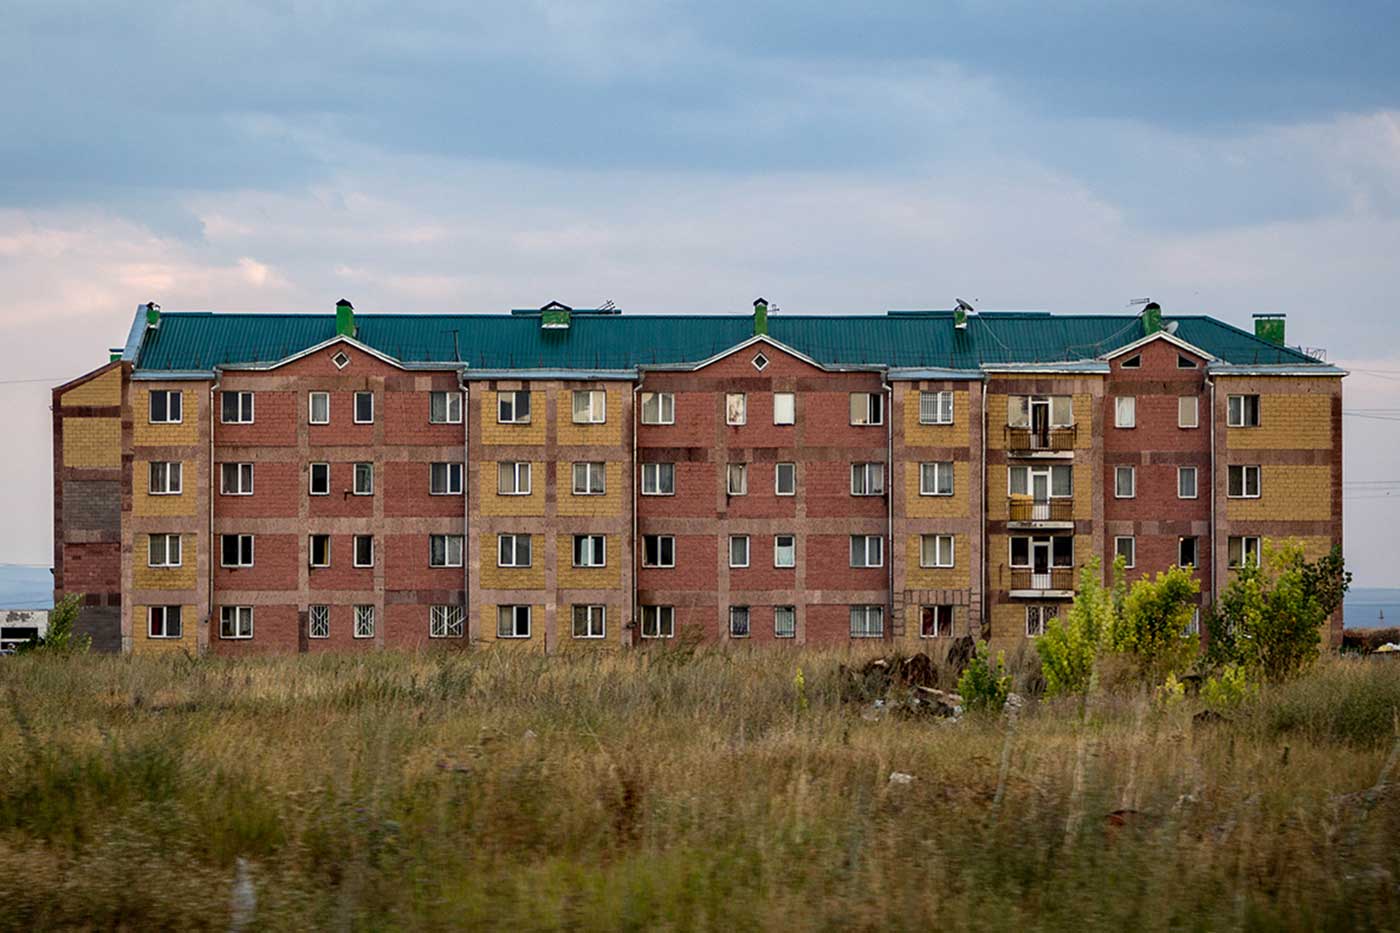 One of the newer residential blocks in the Mush-2 district built for those who lost their homes in the earthquake.